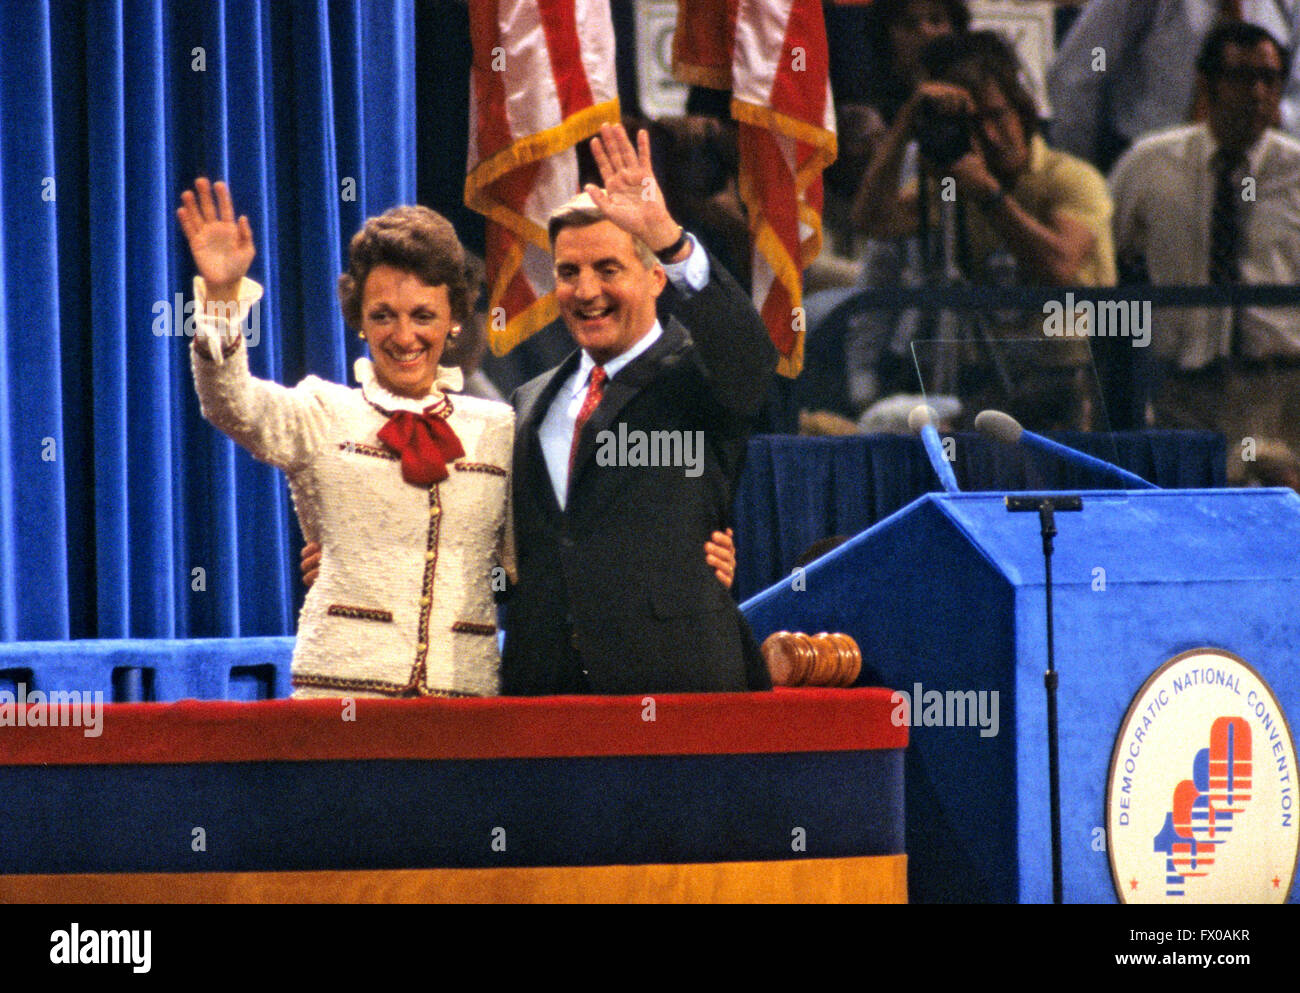 New York, New York, USA. 14th Aug, 1980. United States Vice President President Walter Mondale delivers his speech accepting his party's nomination for reelection as President of the United States at the 1980 Democratic National Convention in Madison Square Garden in New York, New York on August 13, 1980.Credit: Howard L. Sachs/CNP © Howard L. Sachs/CNP/ZUMA Wire/Alamy Live News Stock Photo